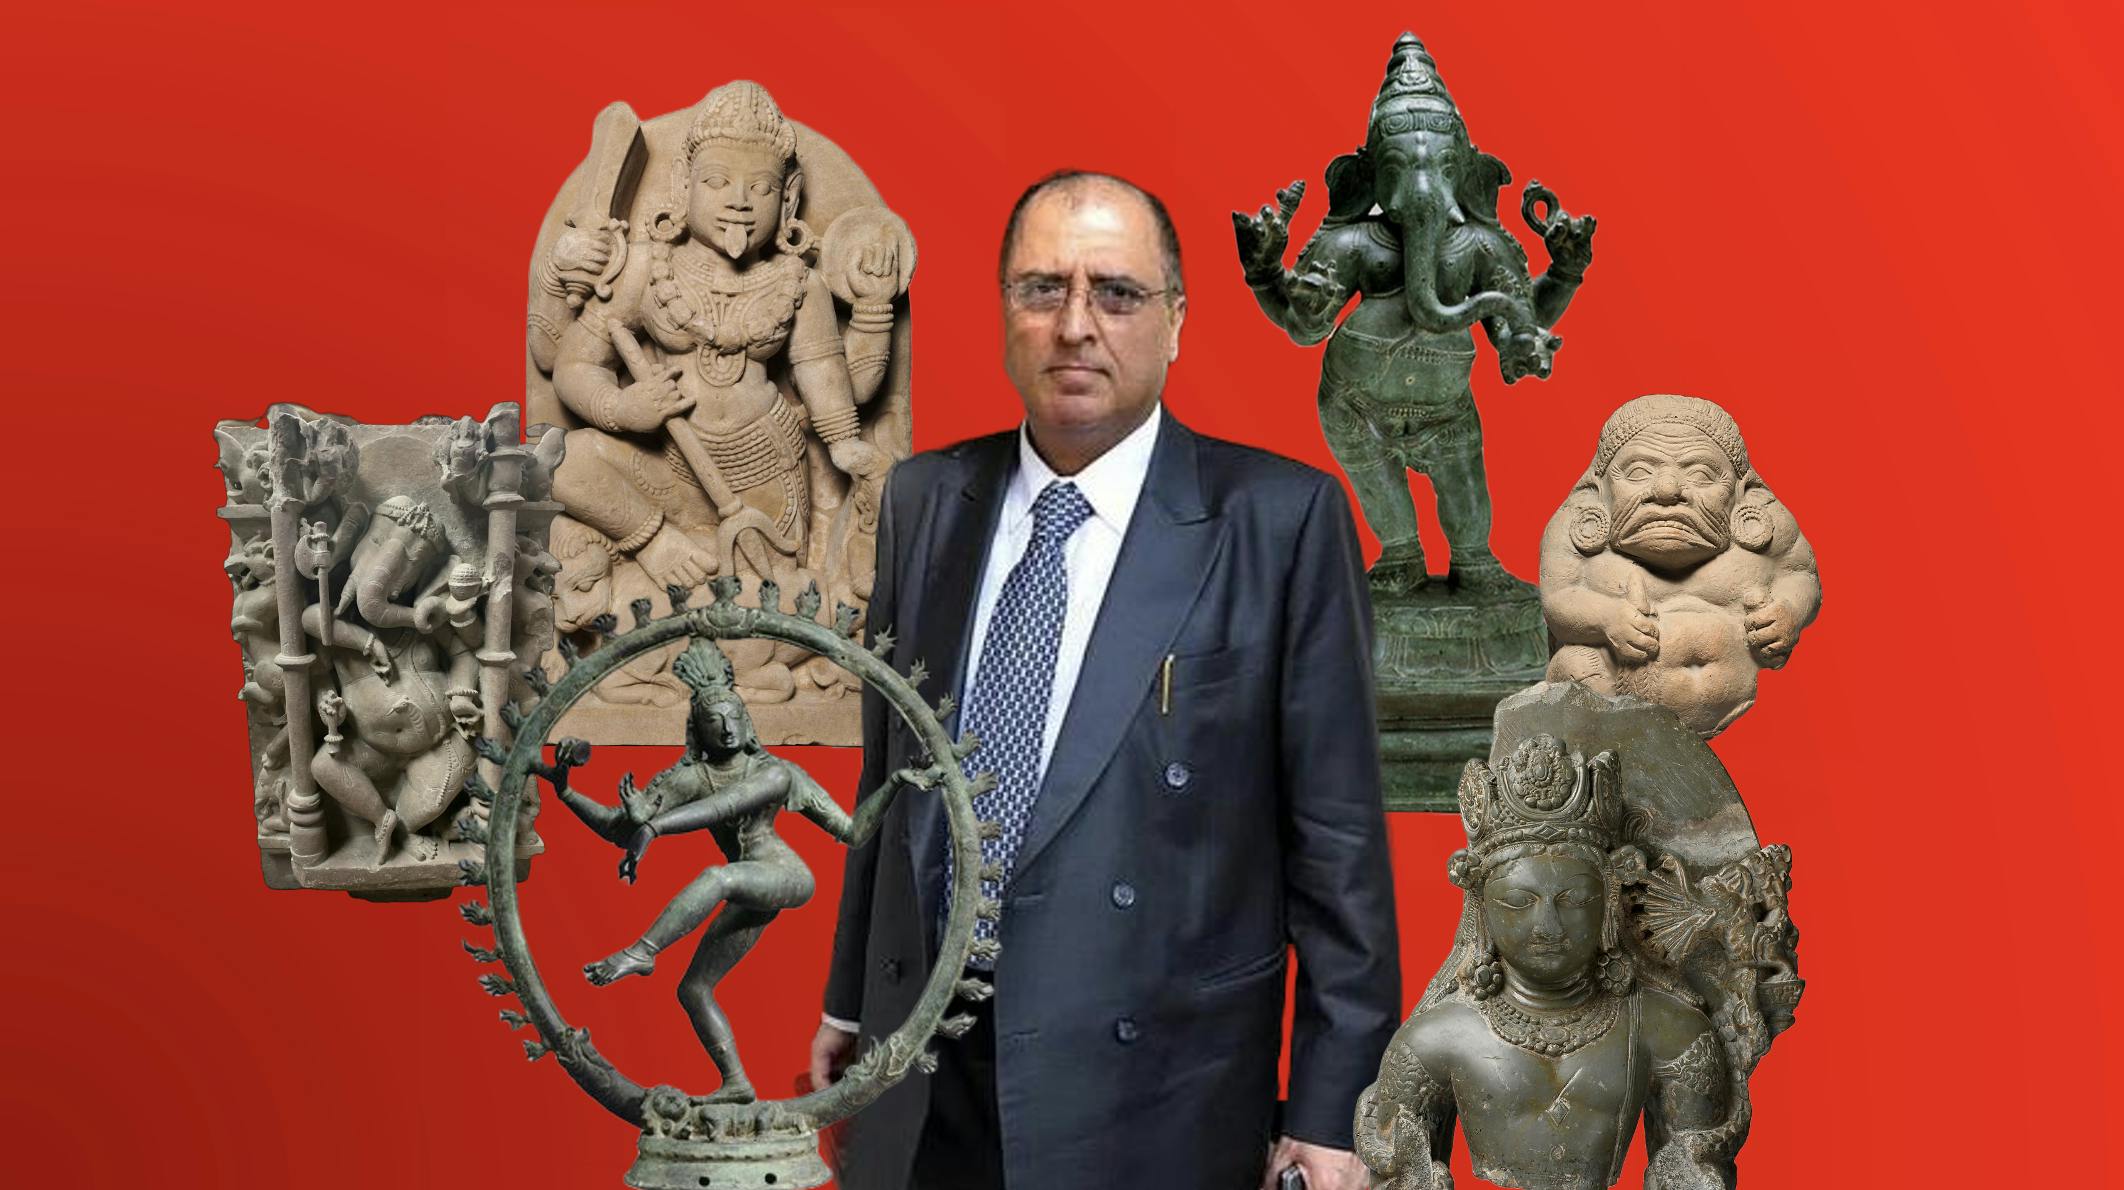 Subhash Kapoor, the Indian-American art smuggler, has received worldwide notoriety (The Juggernaut)